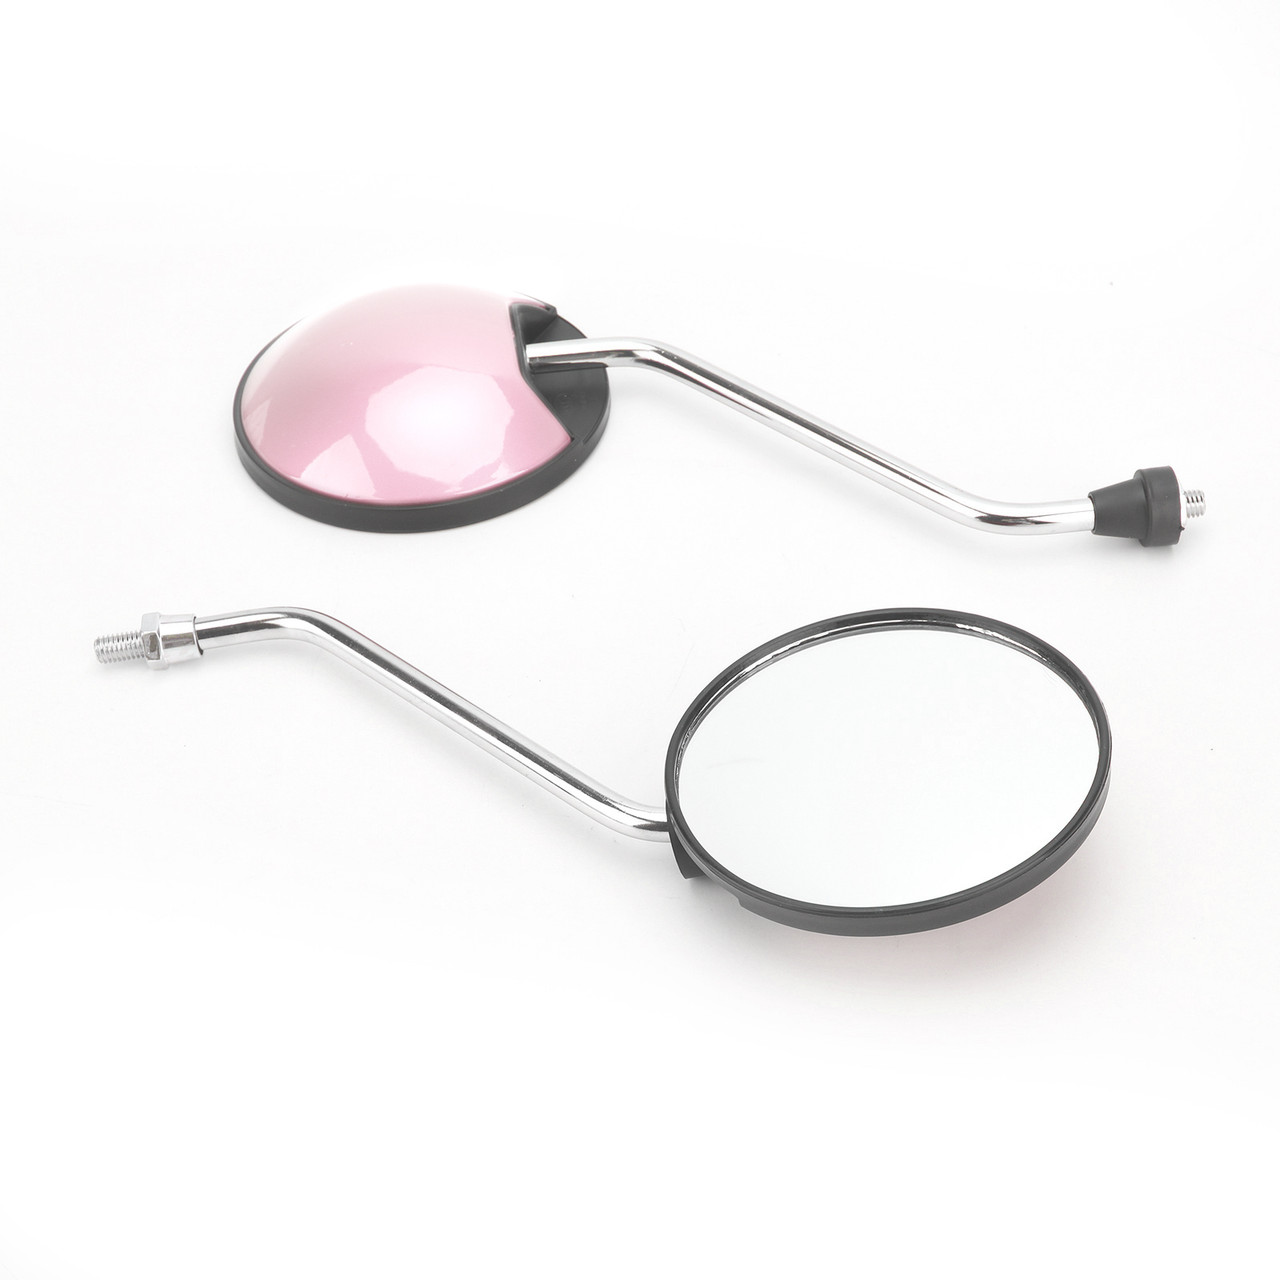 Pair 8mm Rearview Mirrors fits For Kawasaki Scooter Motorcycle Moped Bike ATV with 8MM threads Pink~BC3